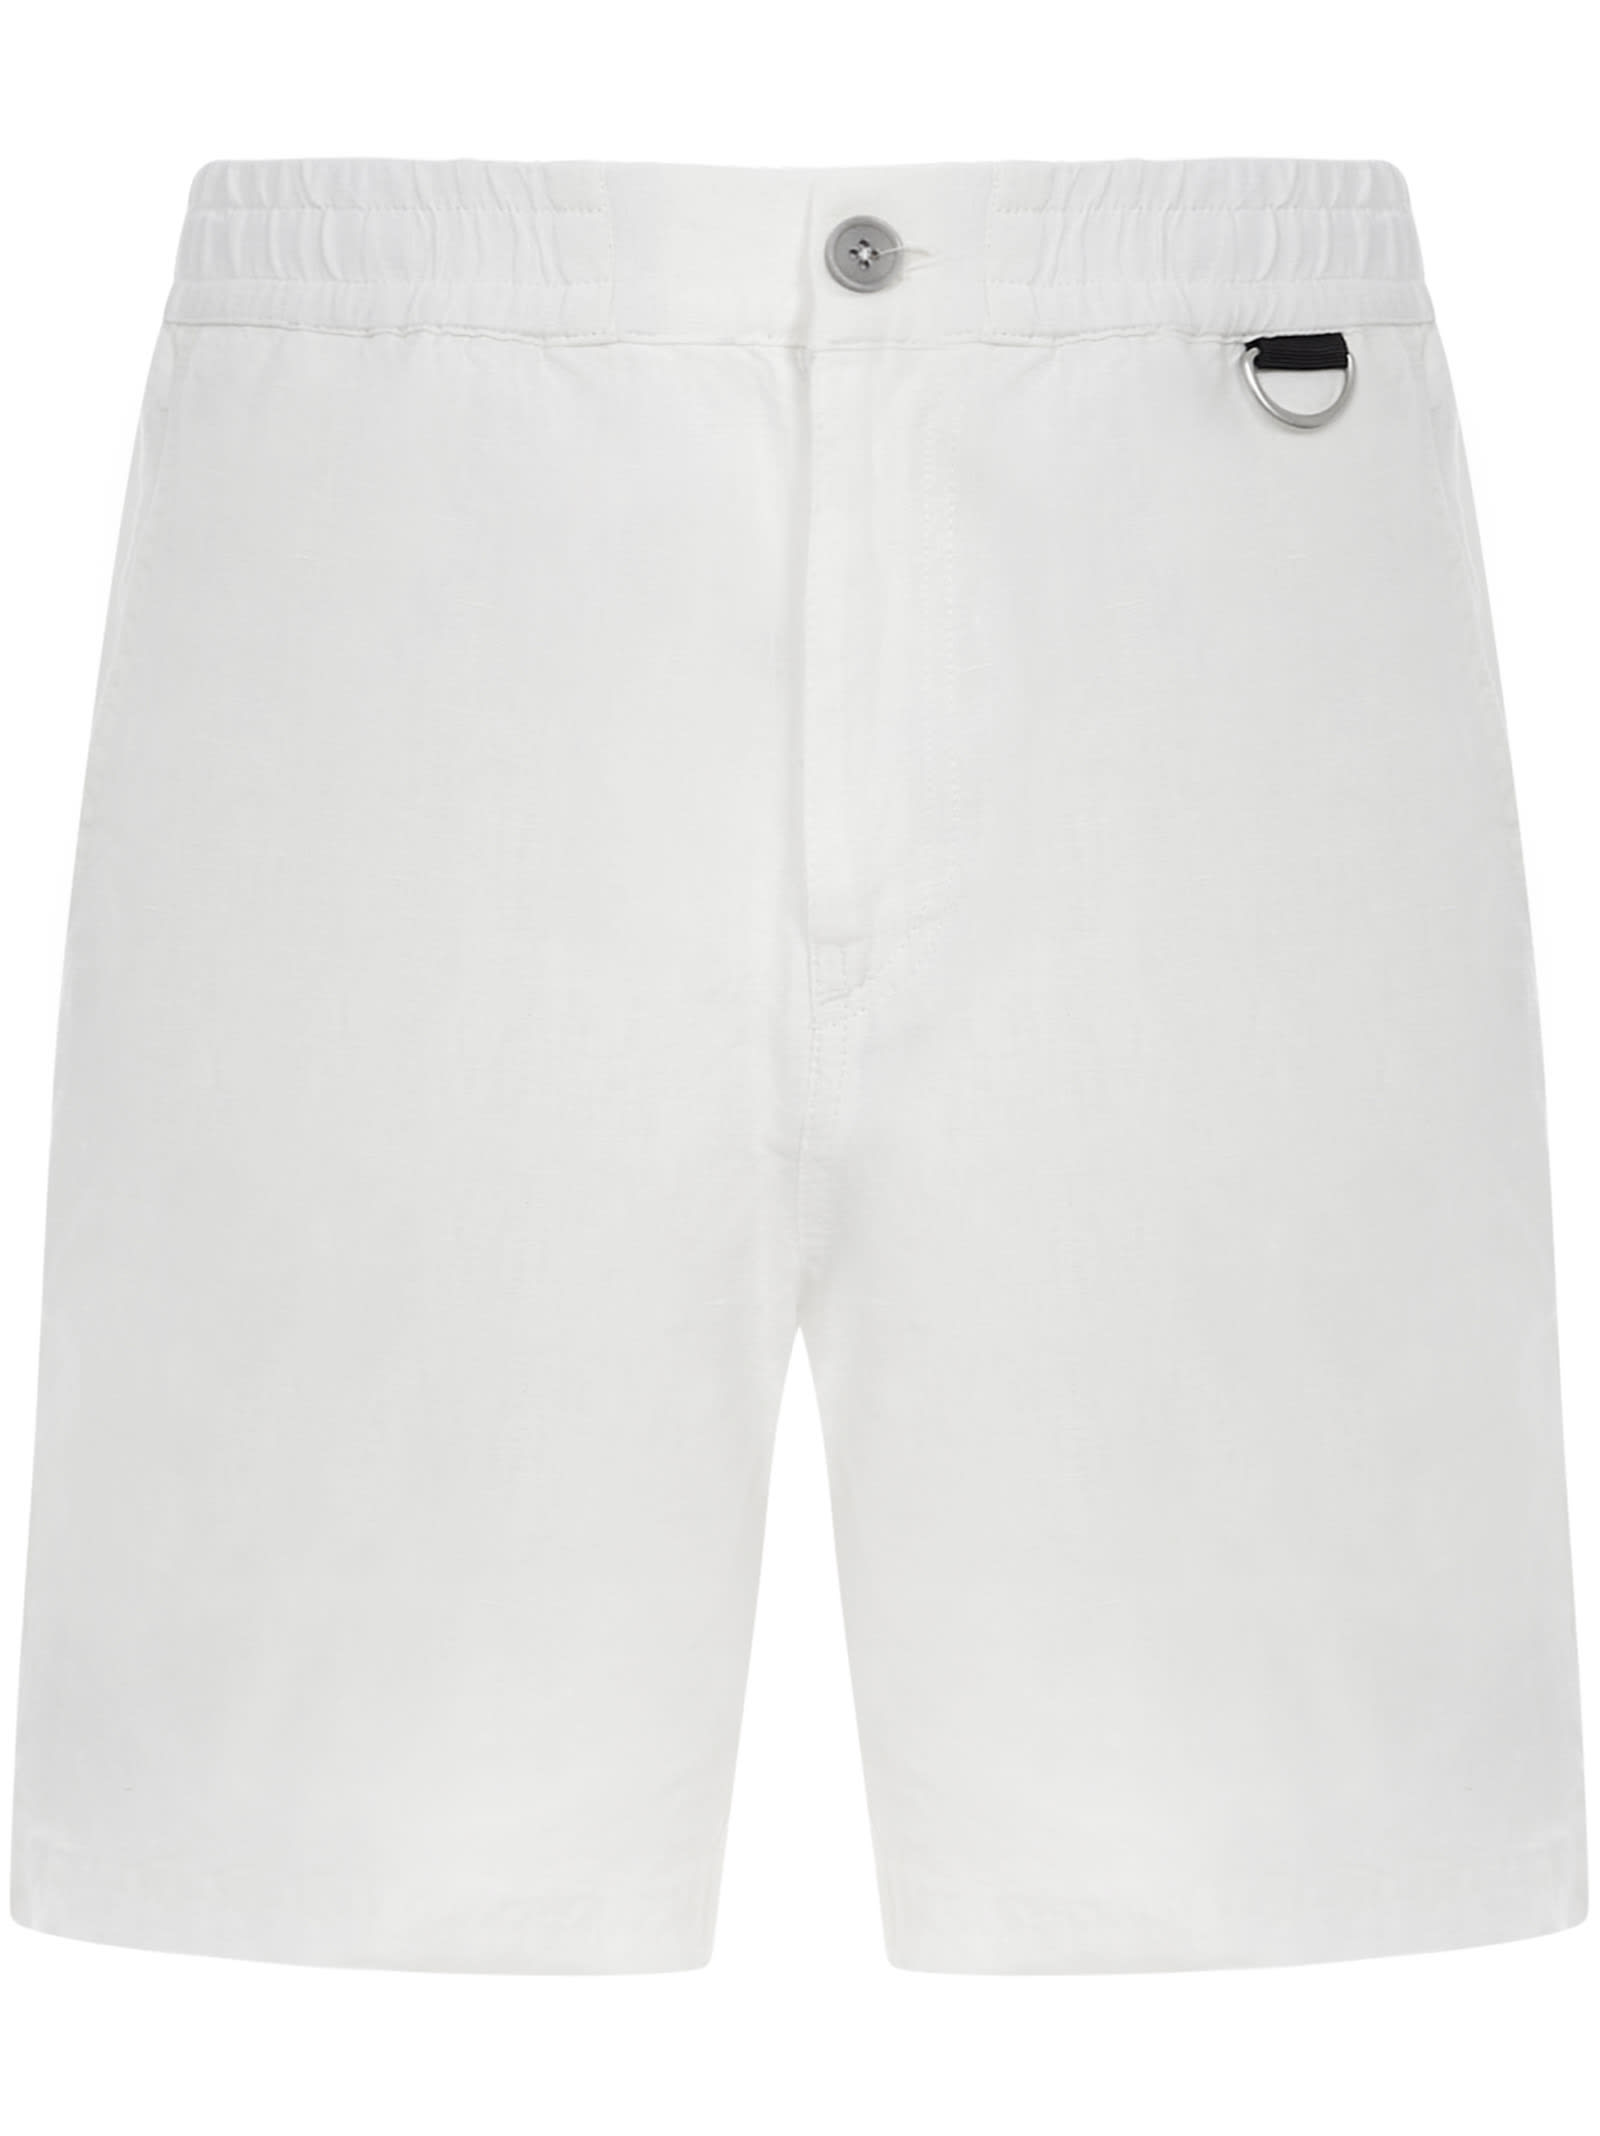 Low Brand Taylor Shorts